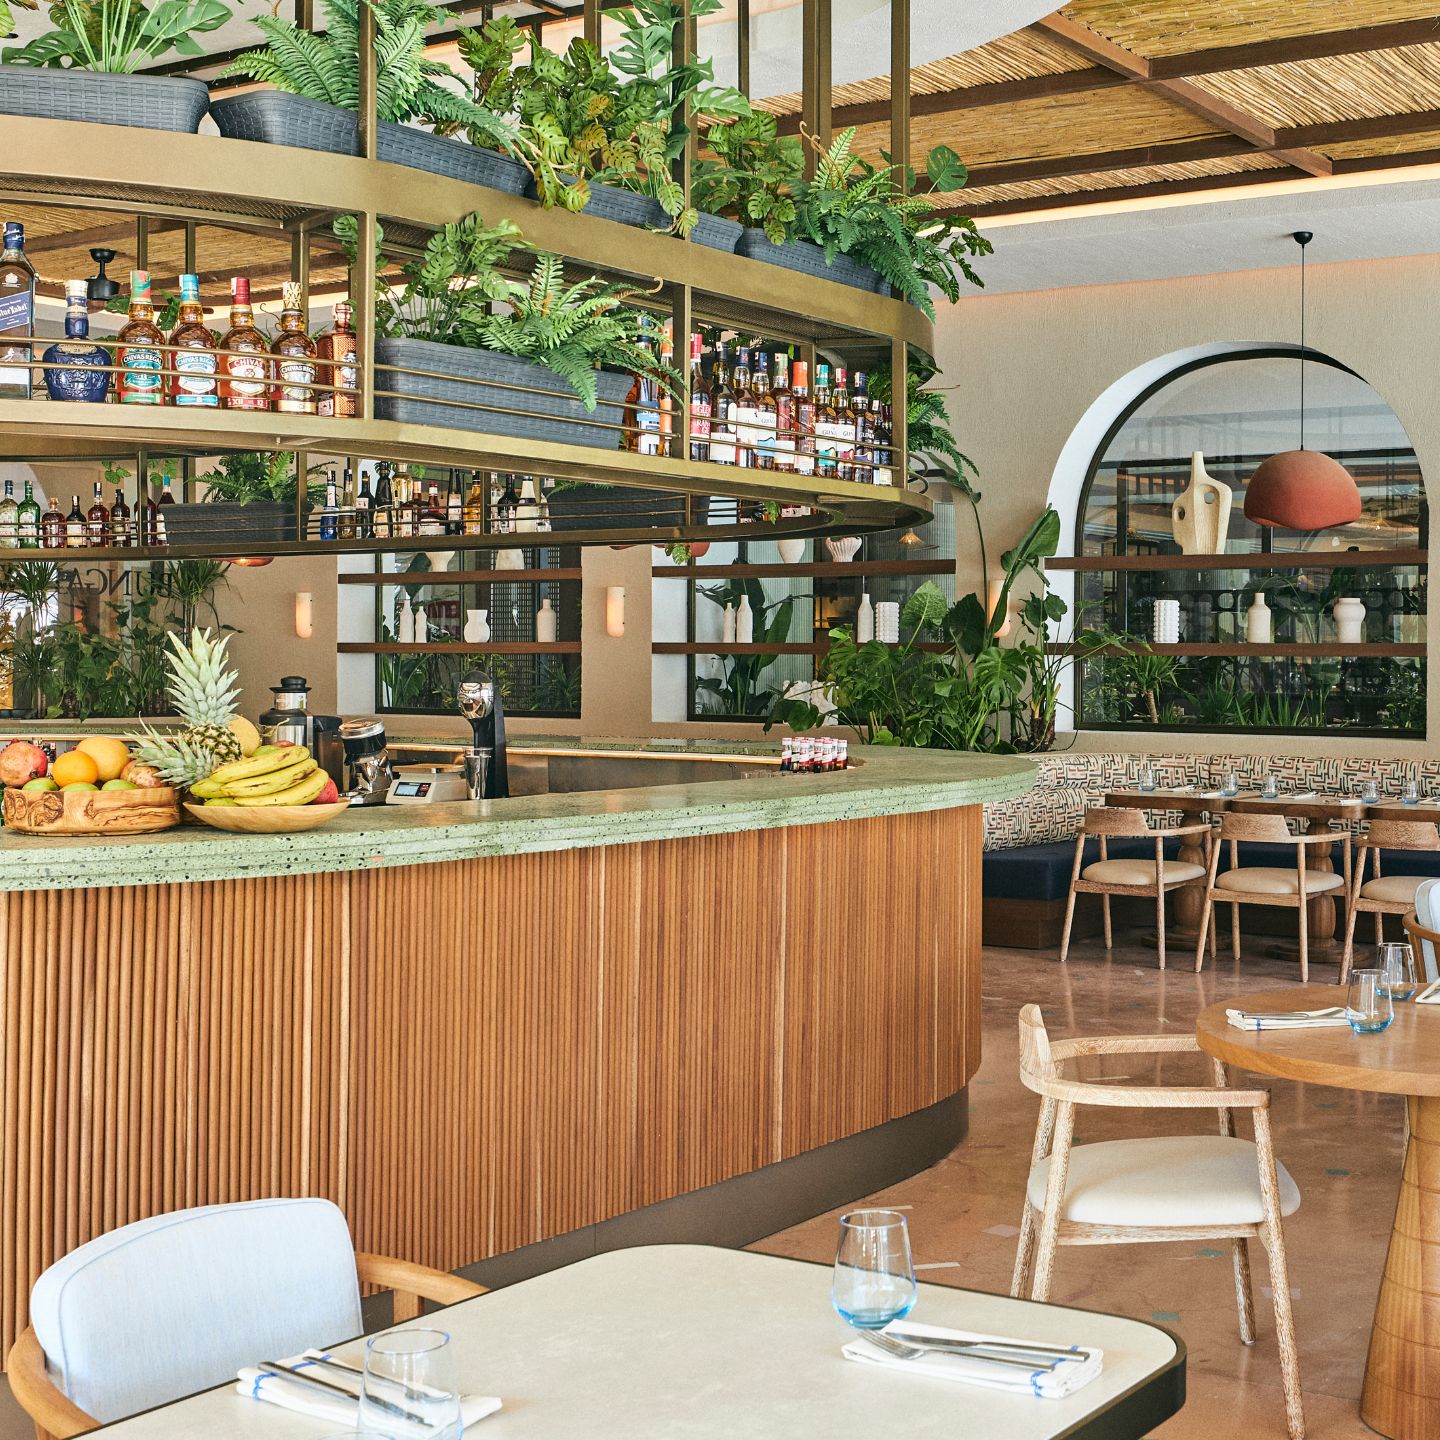 Large wooden bar with green top and plants throughout in a dining space